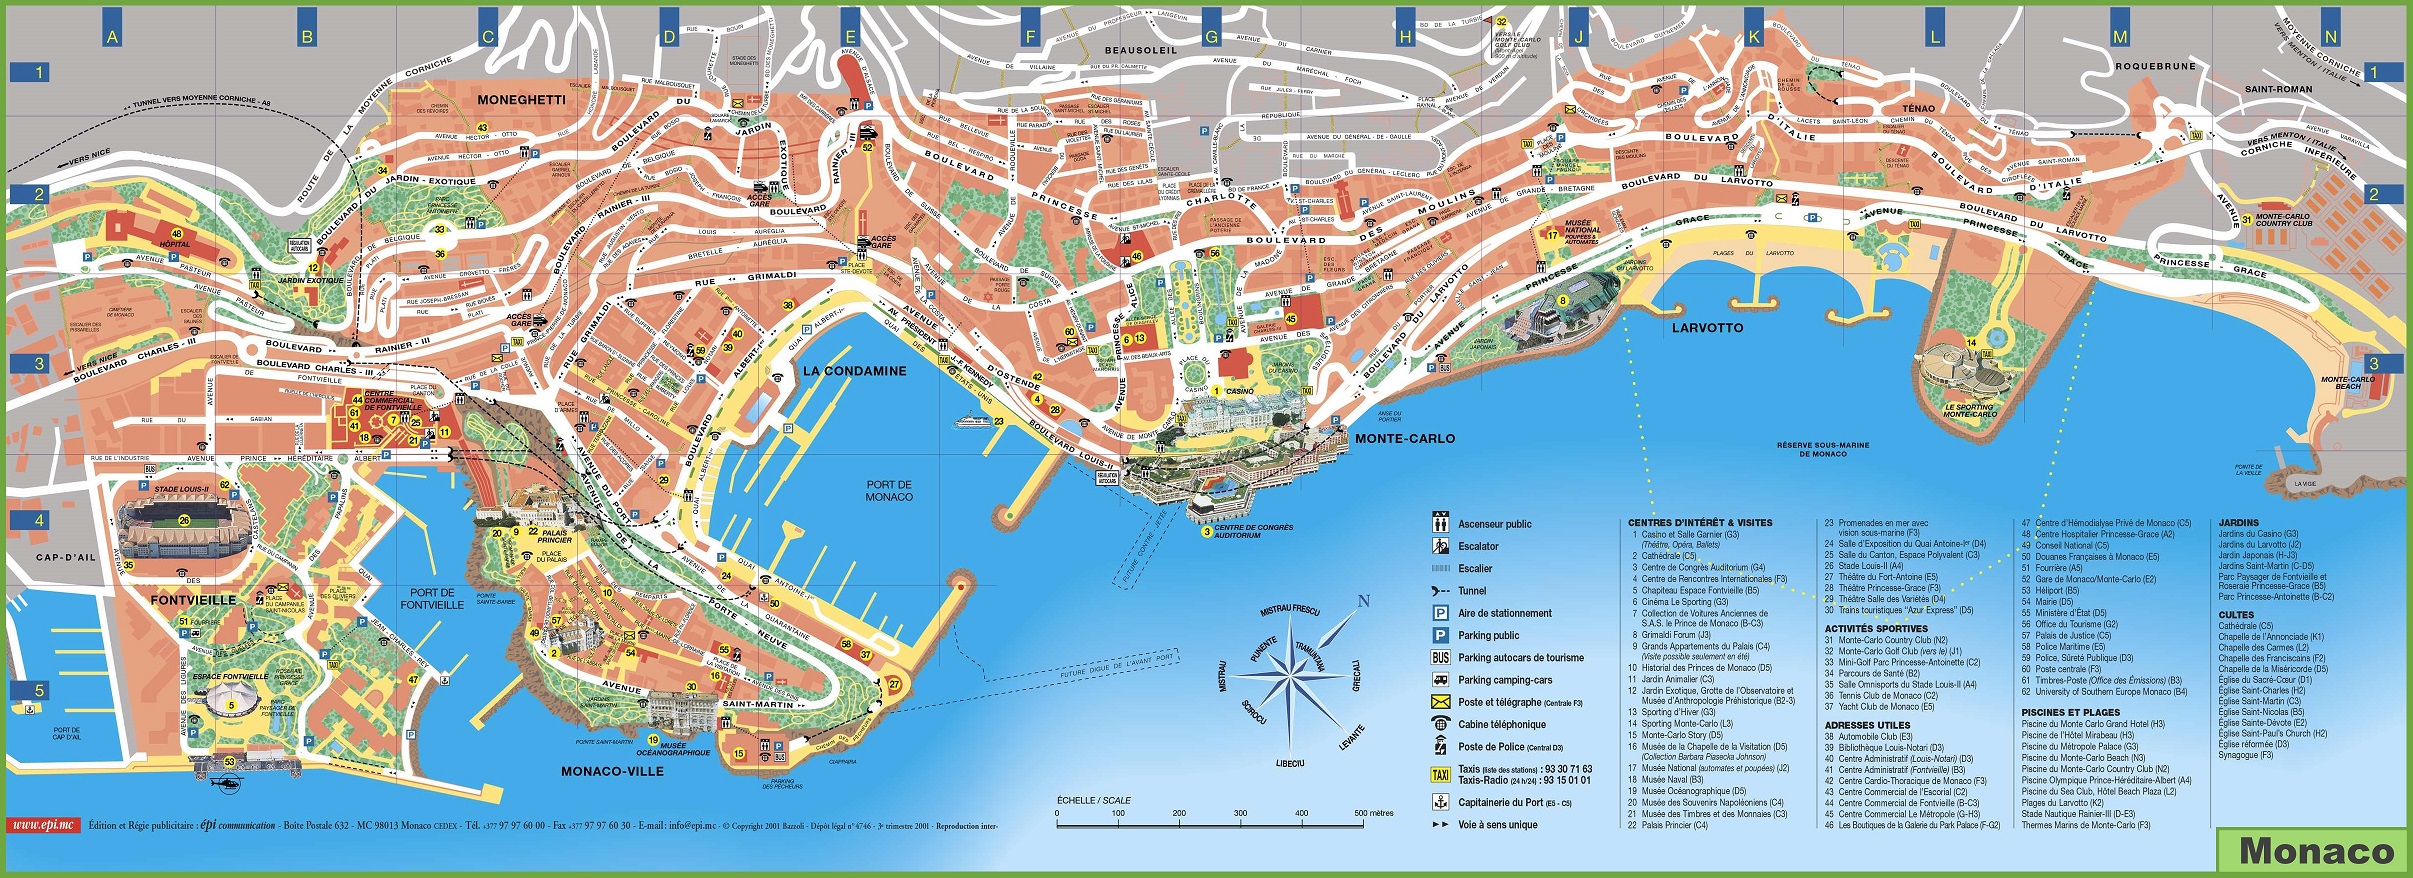 monaco_large-detailed-map-of_but.jpg